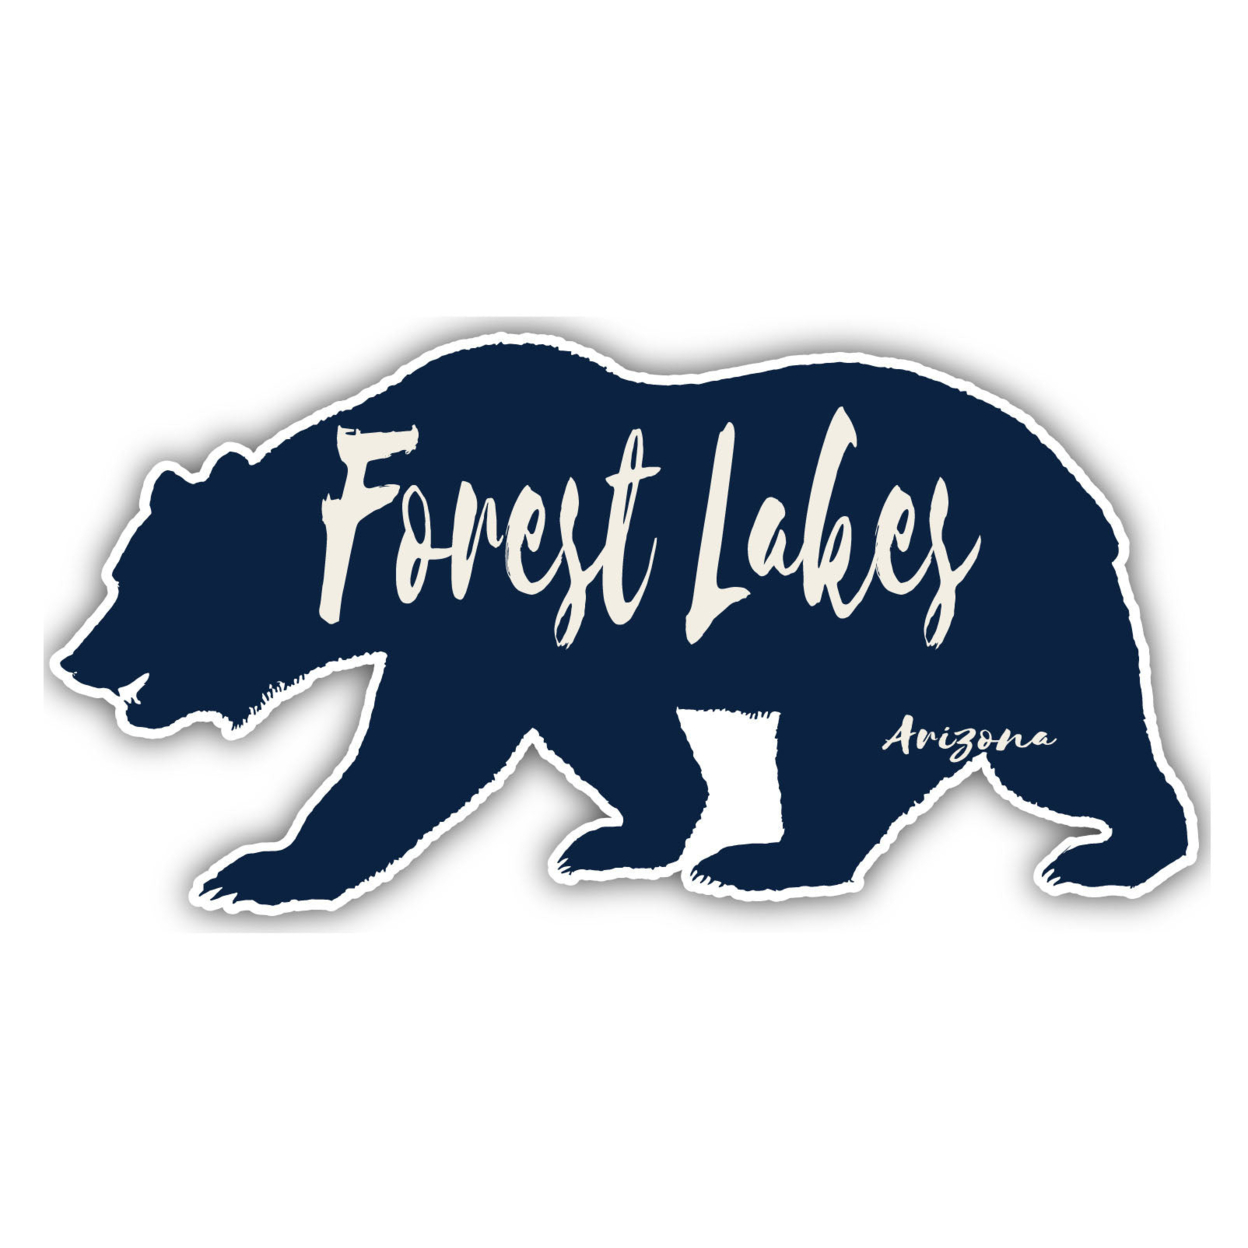 Forest Lakes Arizona Souvenir Decorative Stickers (Choose Theme And Size) - 4-Pack, 12-Inch, Bear